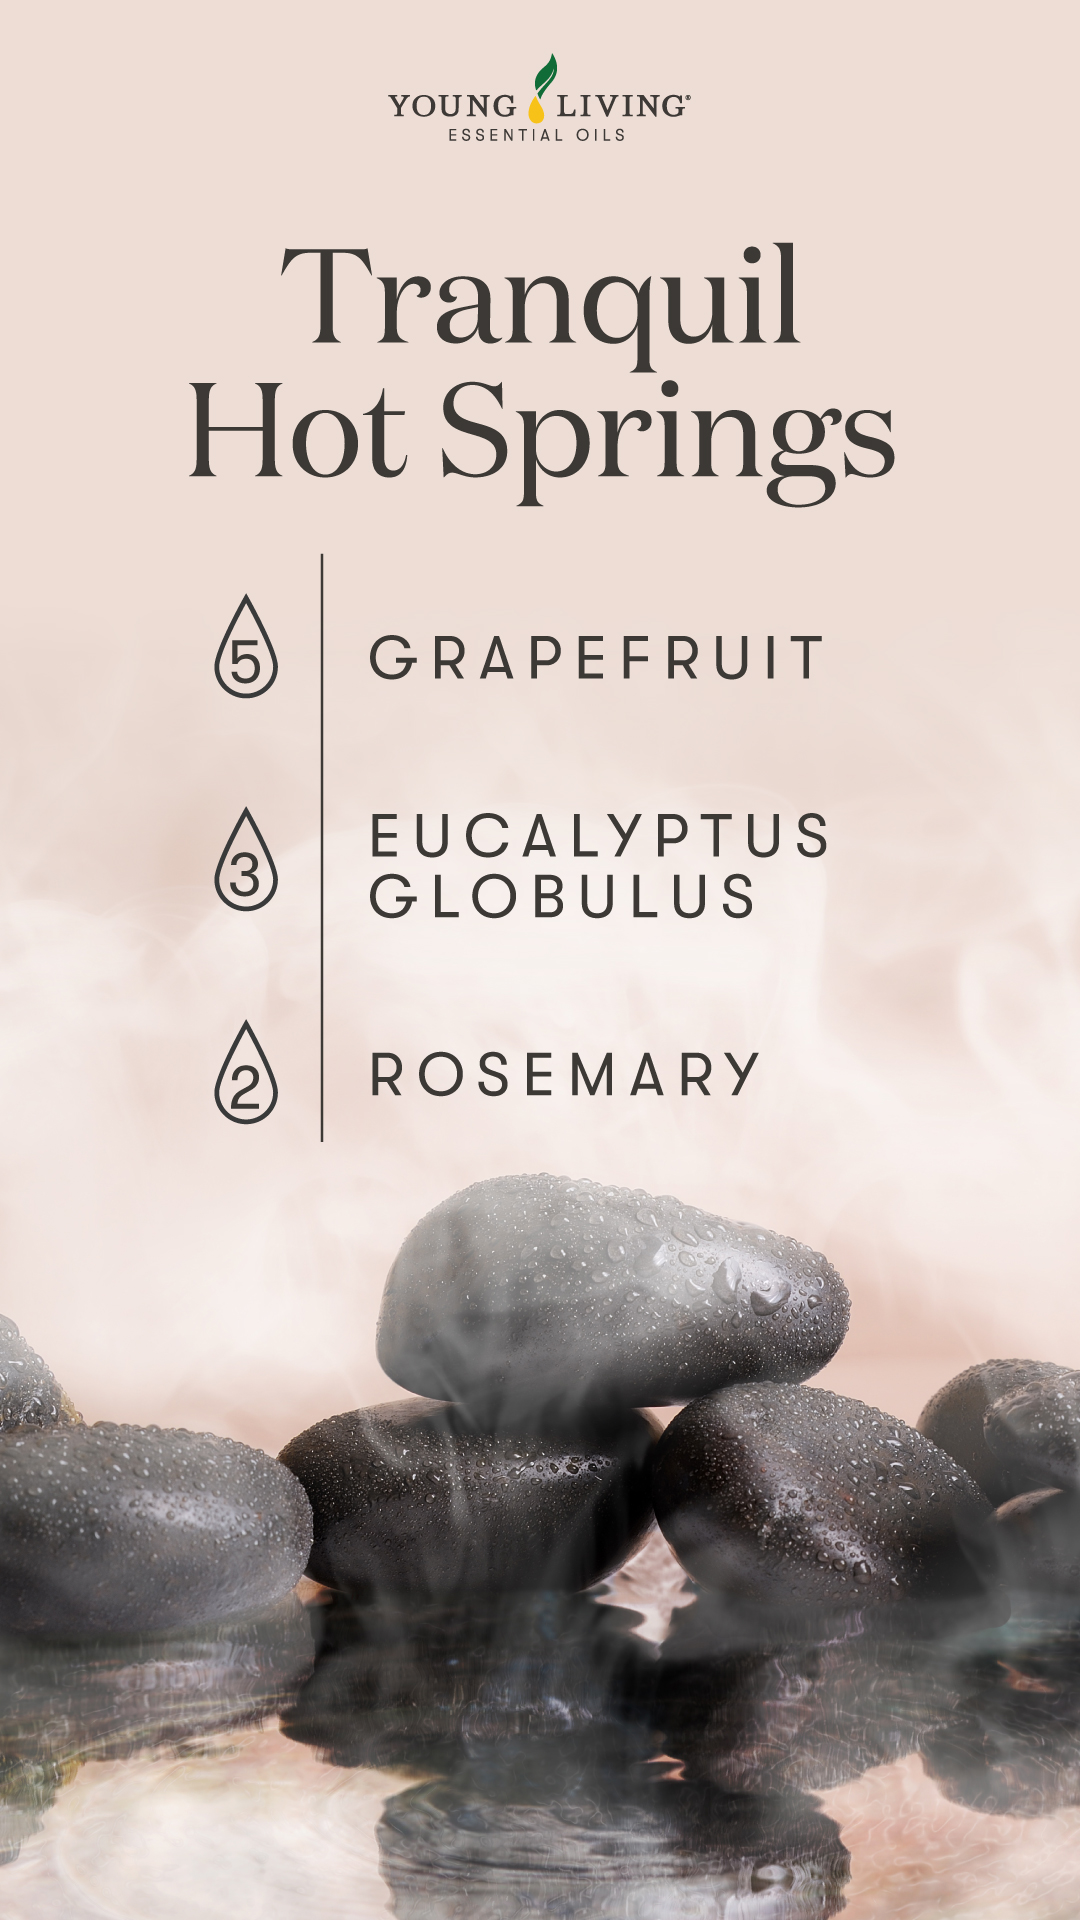 Tranquil Hot Springs diffuser blend - Young Living Lavender Life Blog 